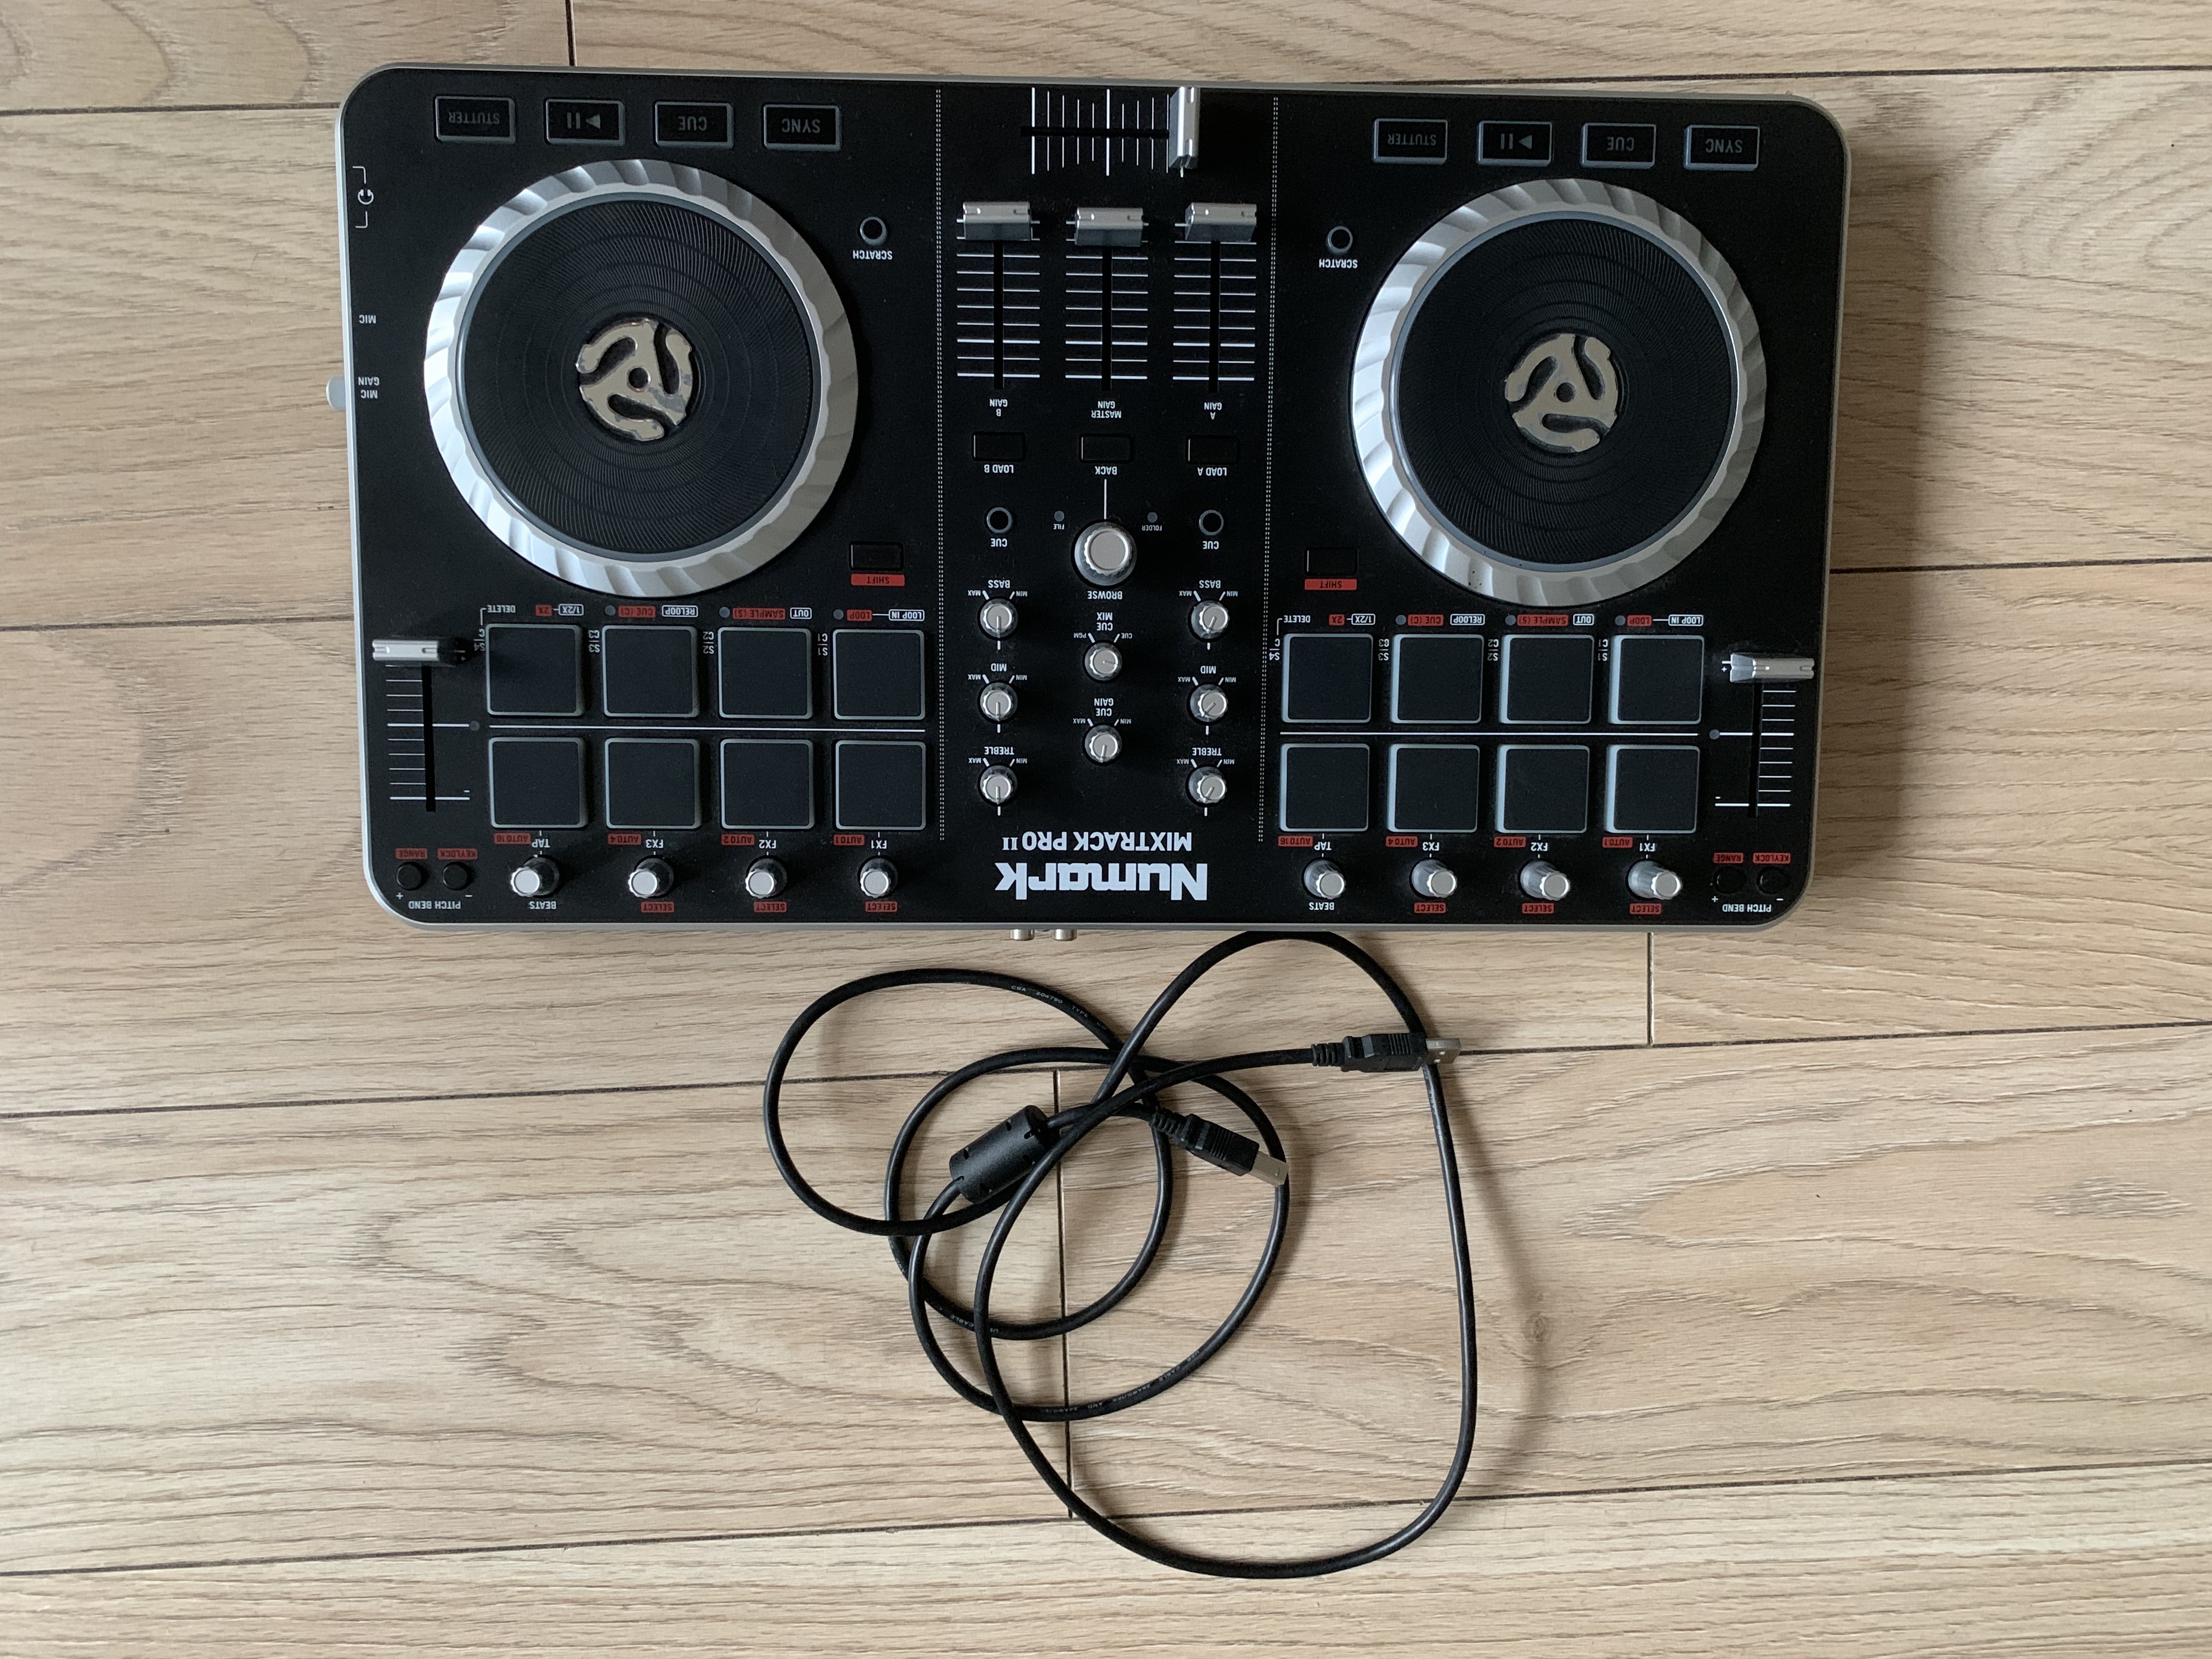 Hercules DJ Control Air vs Numark Mixtrack Pro II: What is the difference?